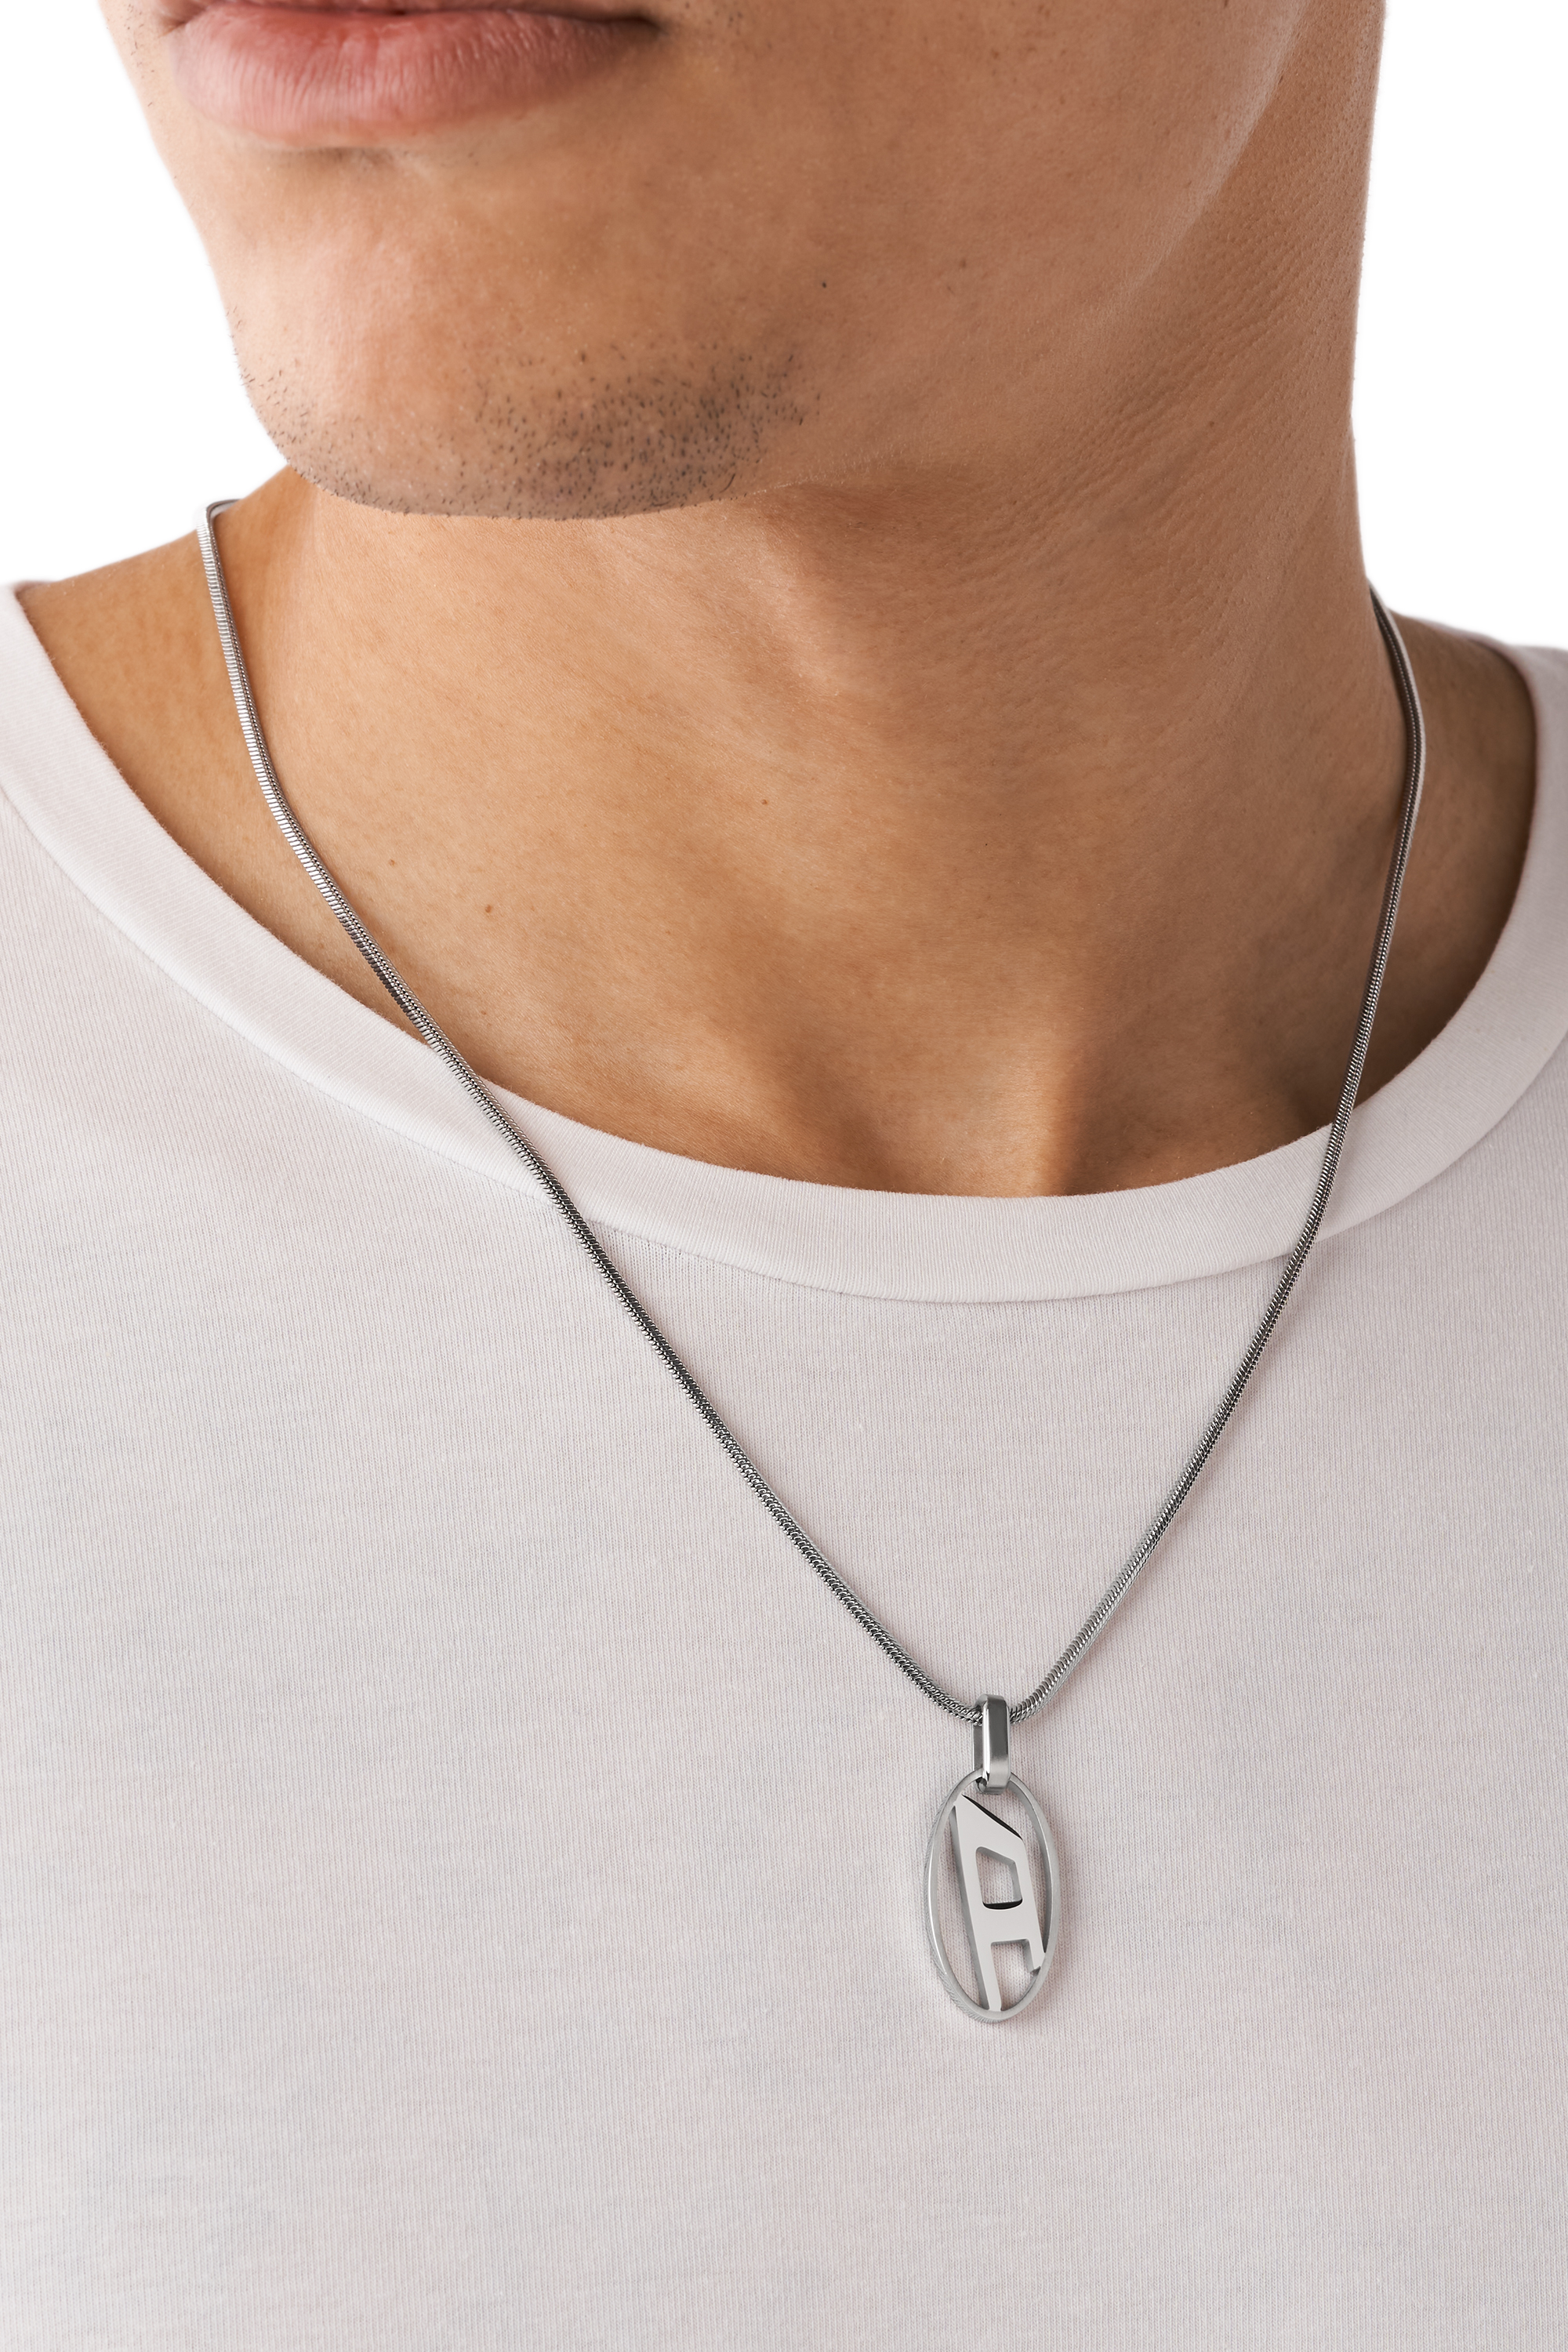 Diesel - DX1342, Unisex Stainless steel pendant necklace in Silver - Image 3